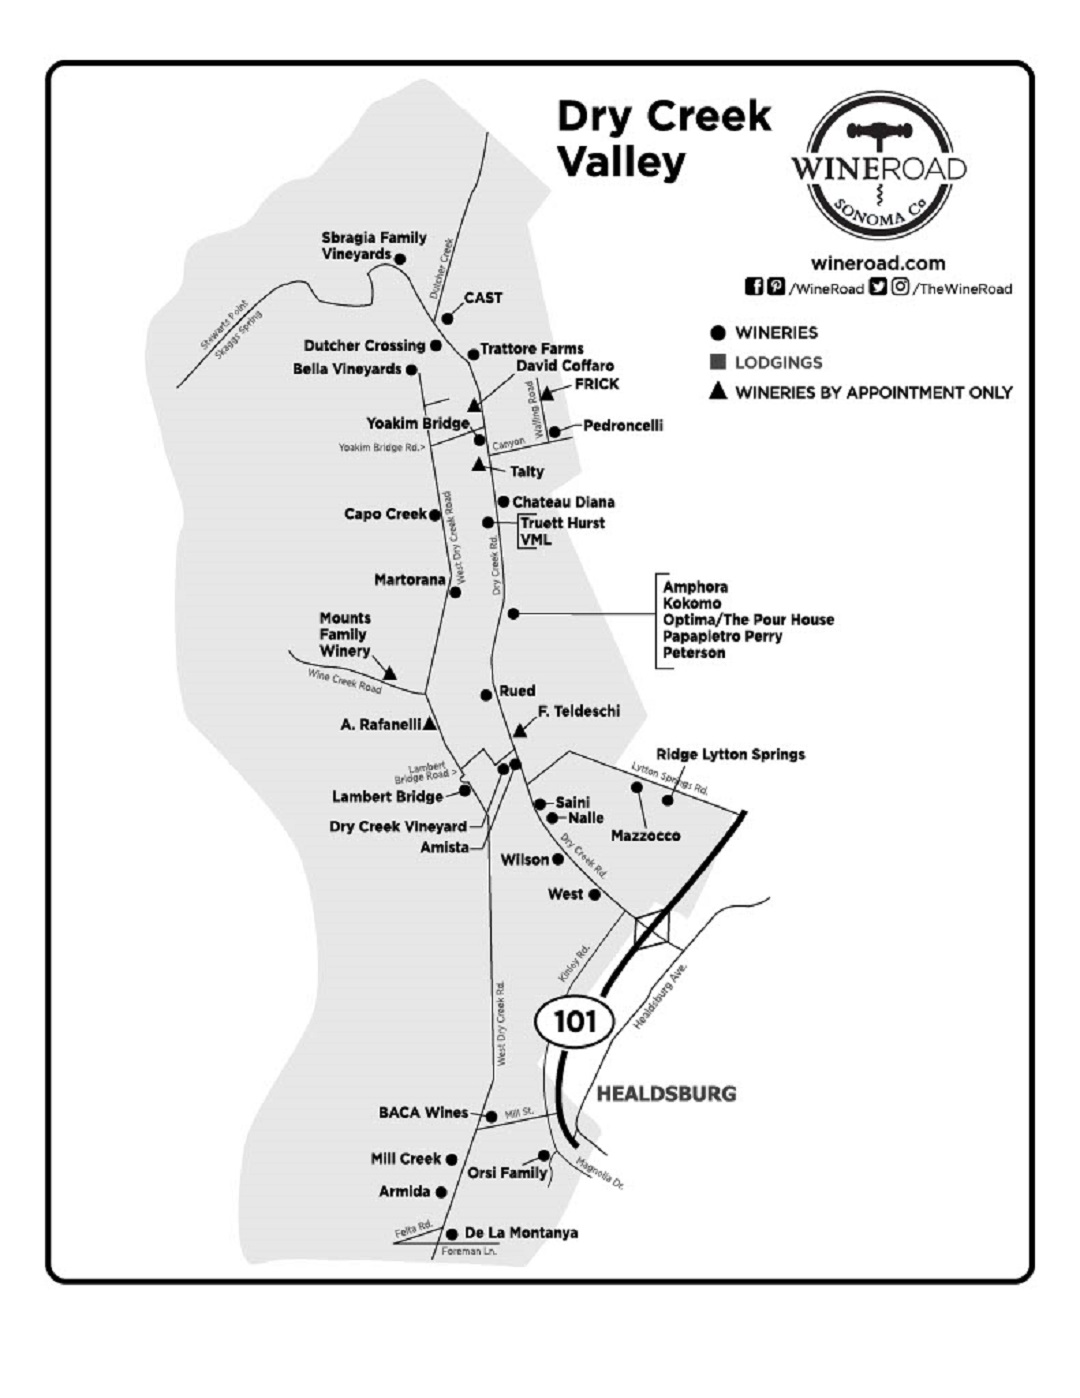 Wine Road map of Dry Creek Valley